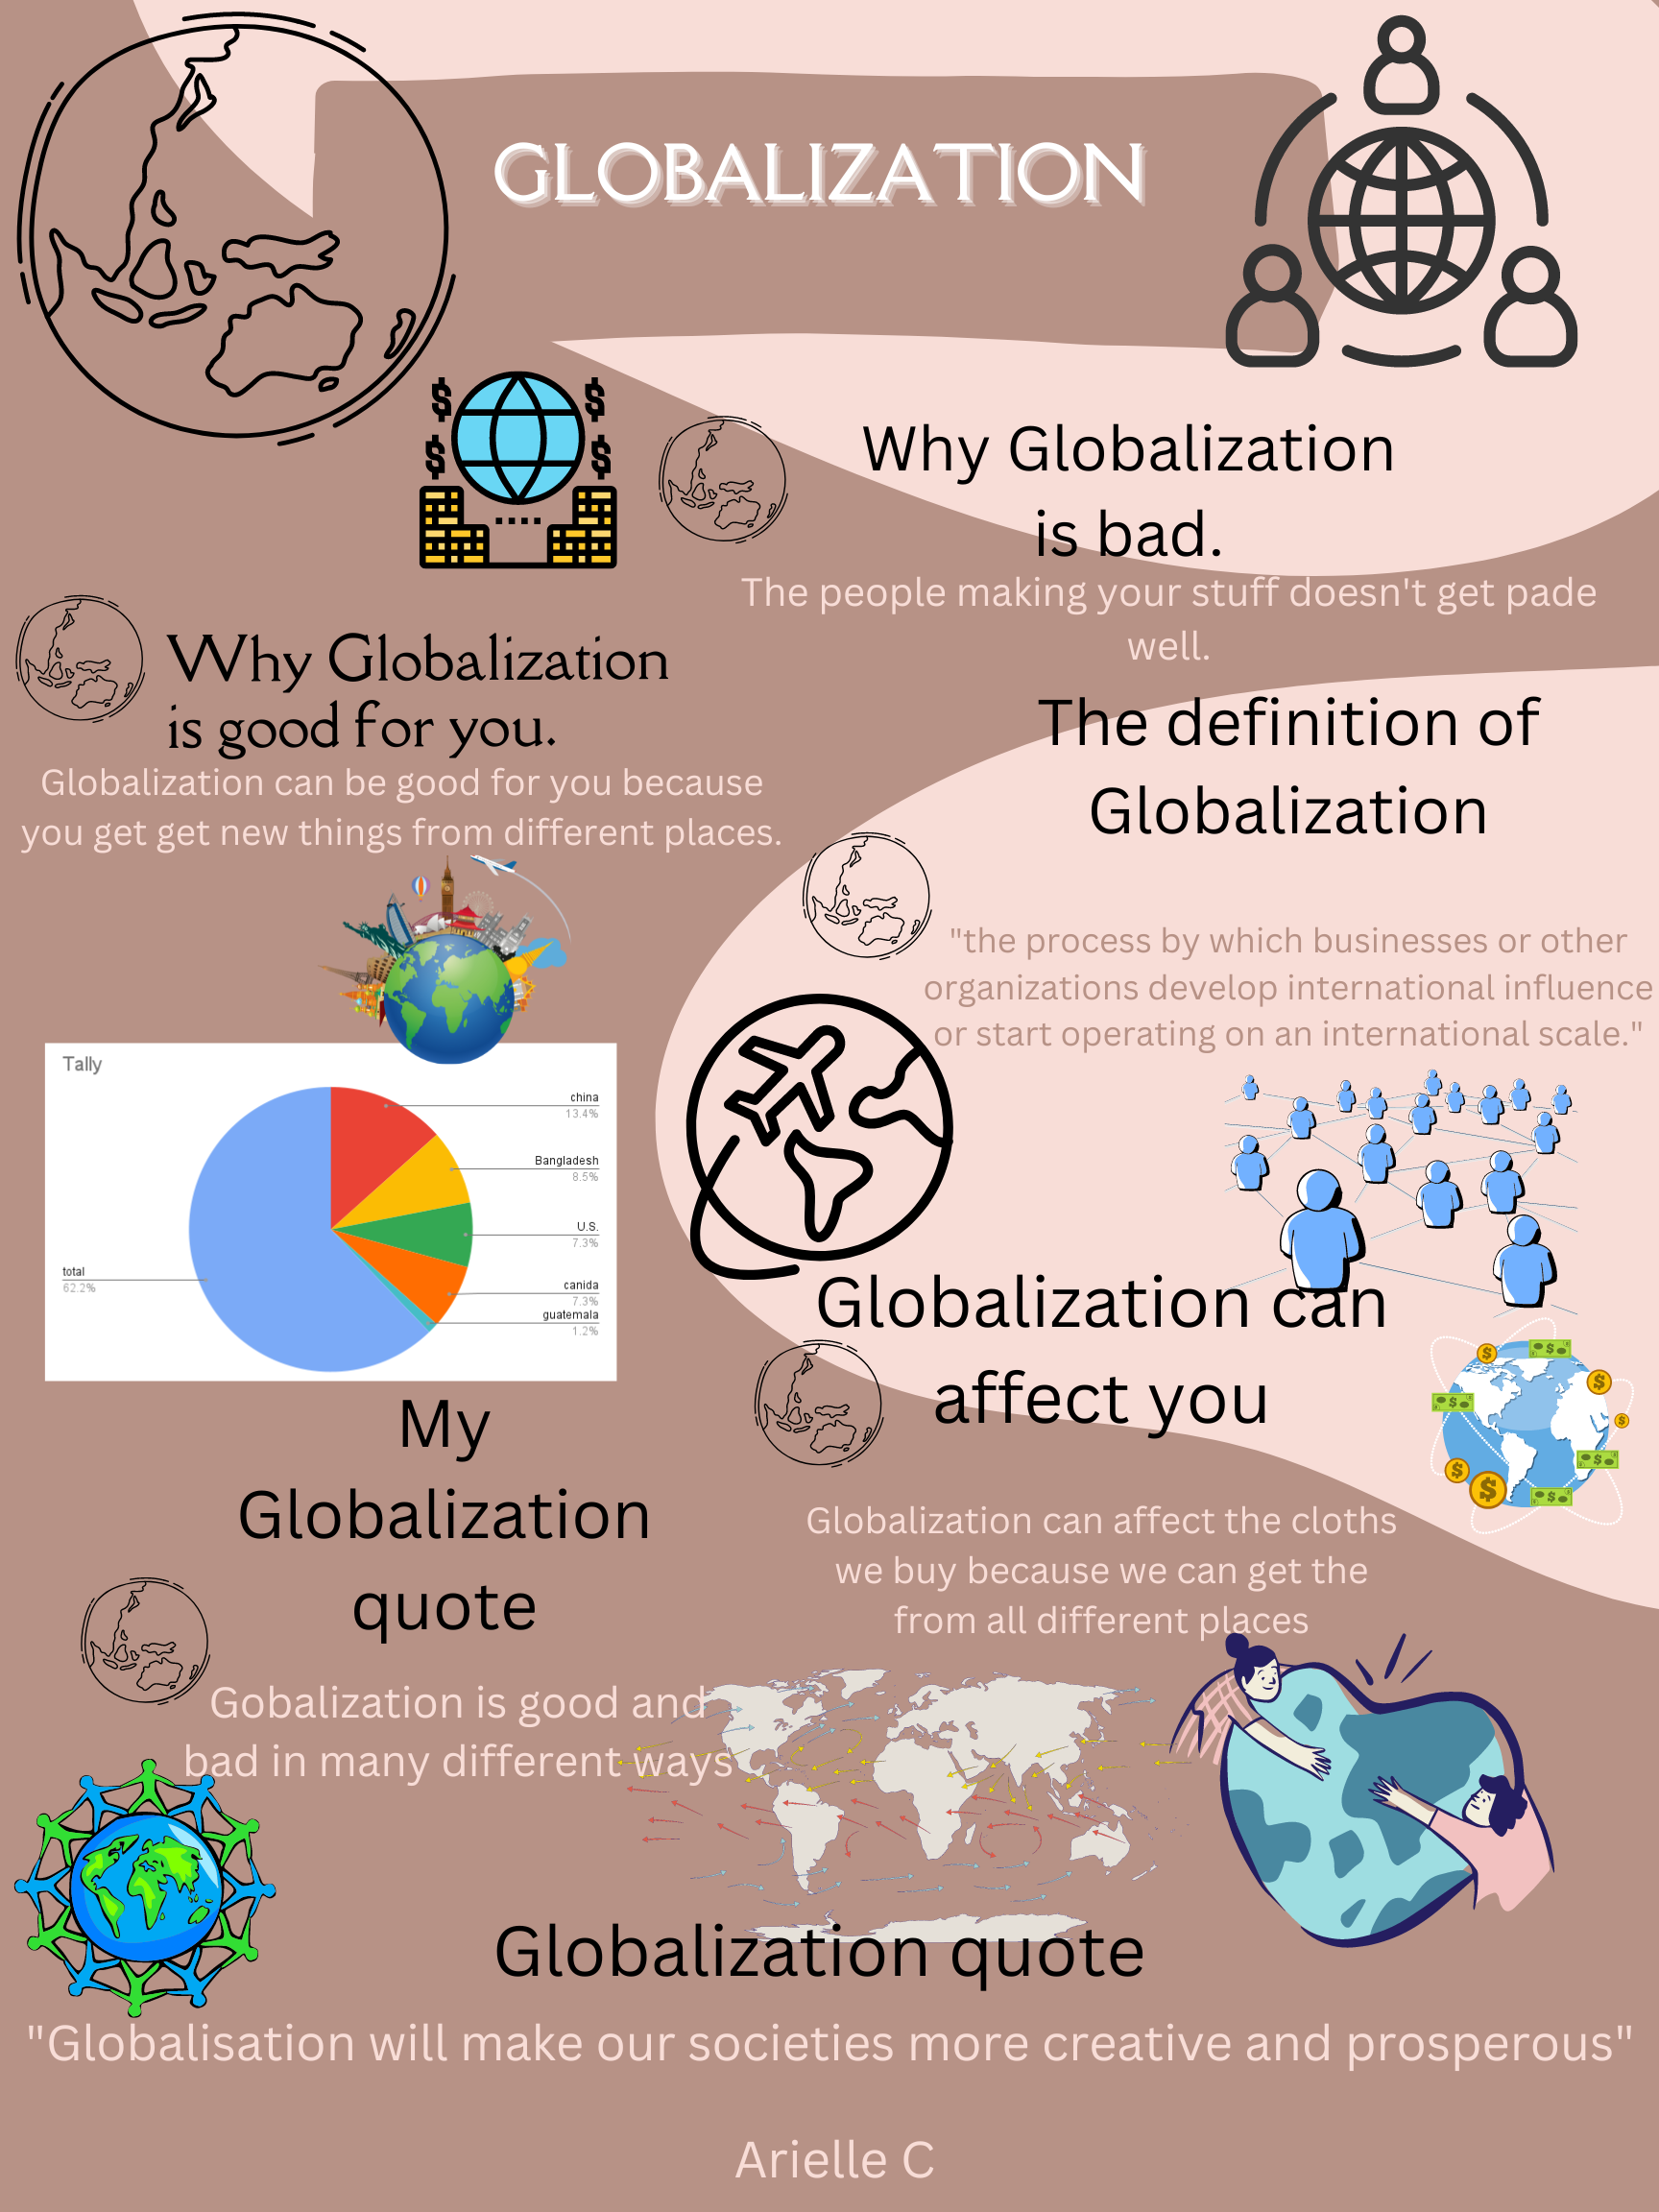 Globalization Infographic - Arielle C